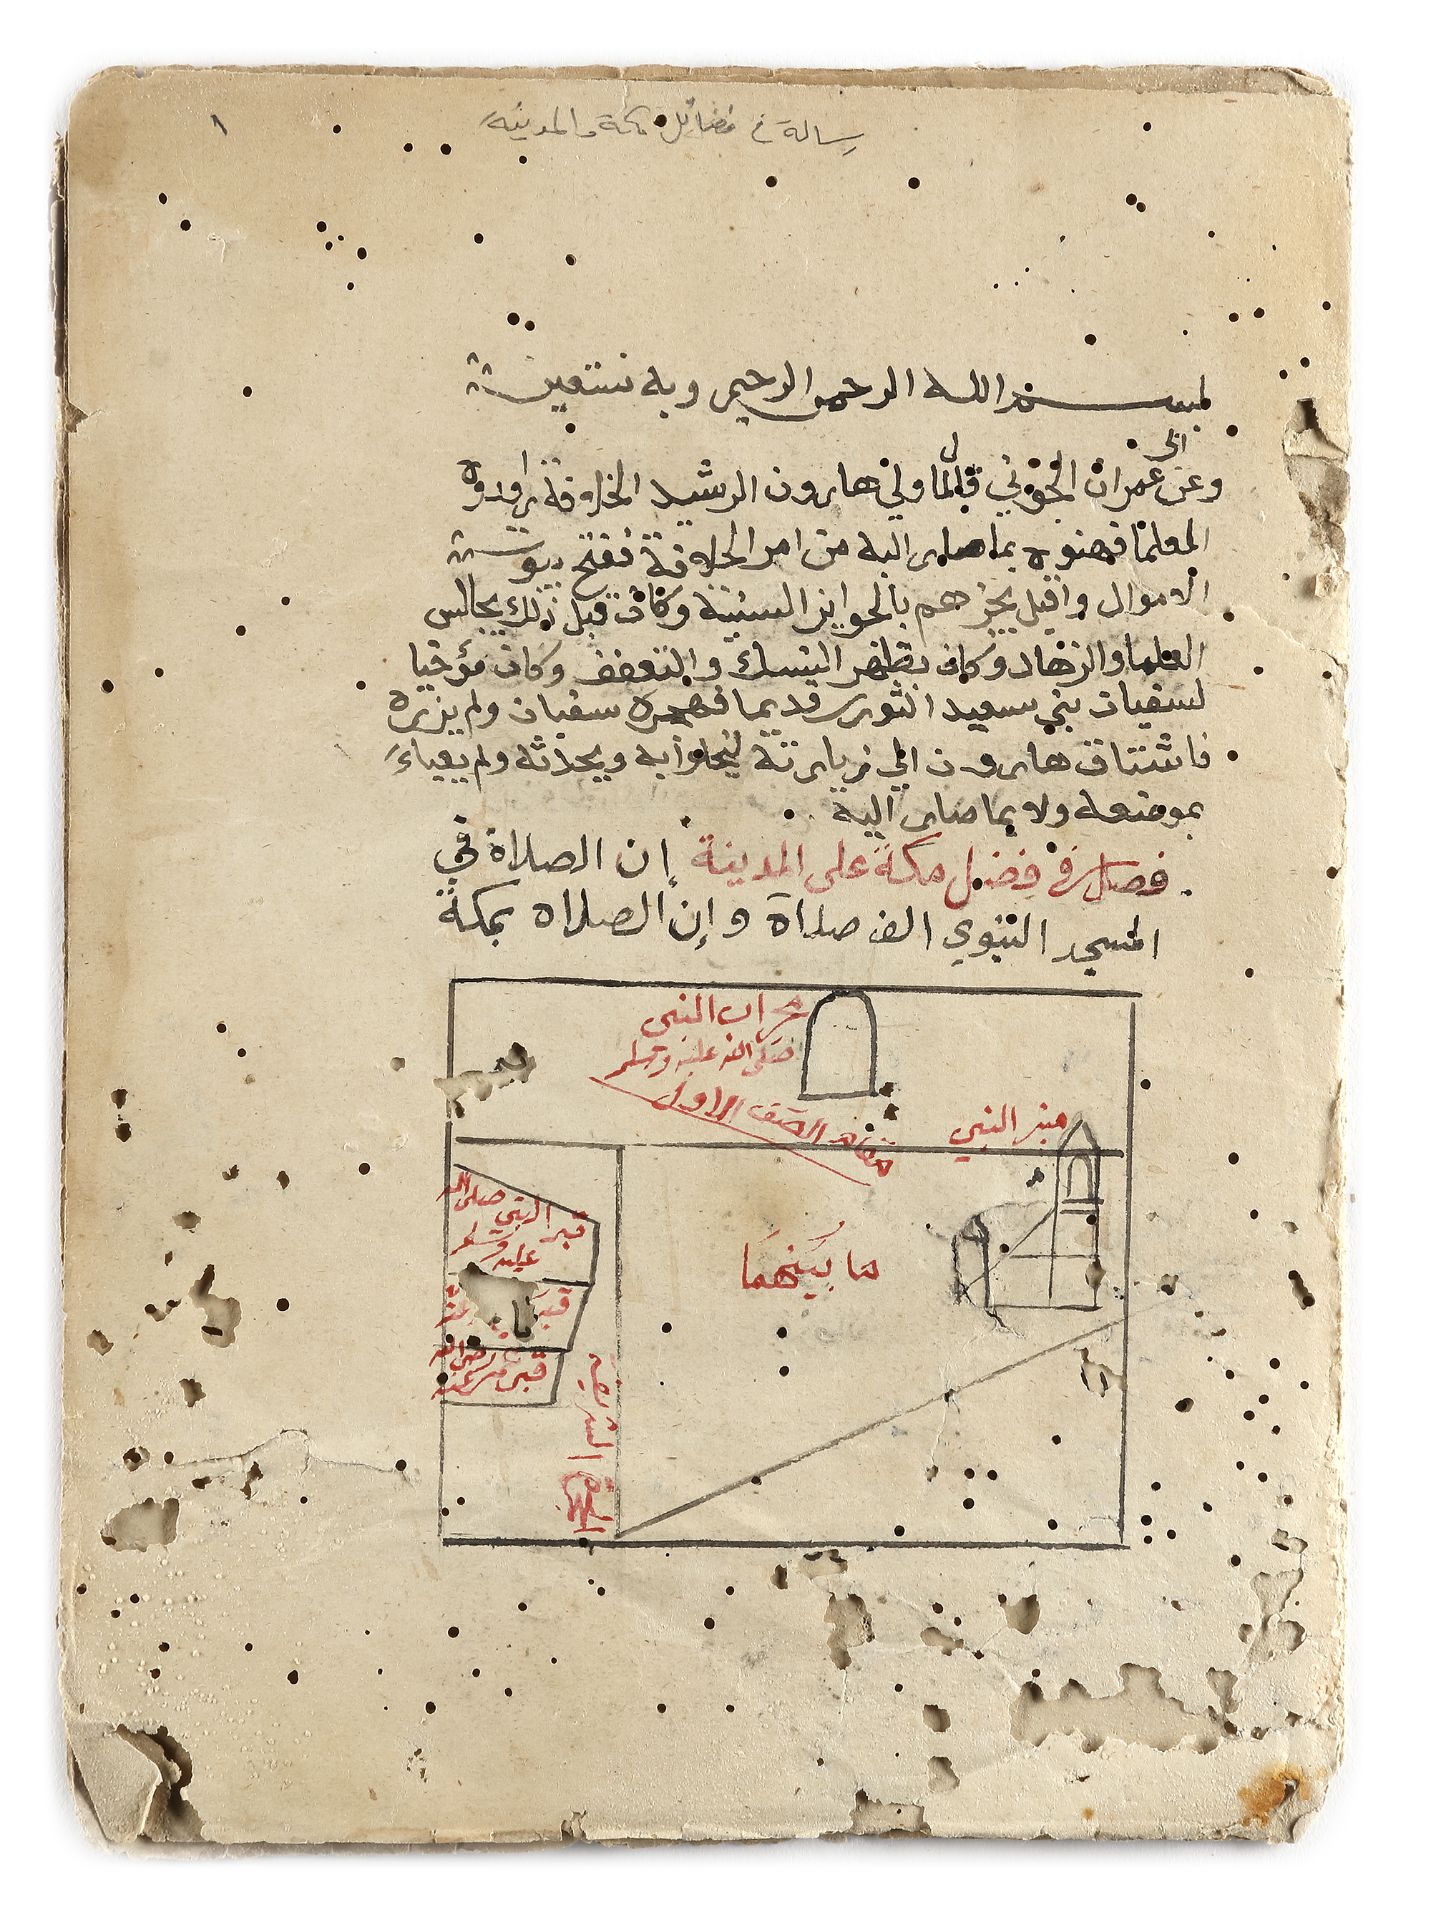 A CHAPTER ABOUT THE MERITS OF MECCA BY IBRAHIM IBN AHMED AL-SHAFI'I, IN MECCA AND DATED 1267 AH/1850 - Image 2 of 4